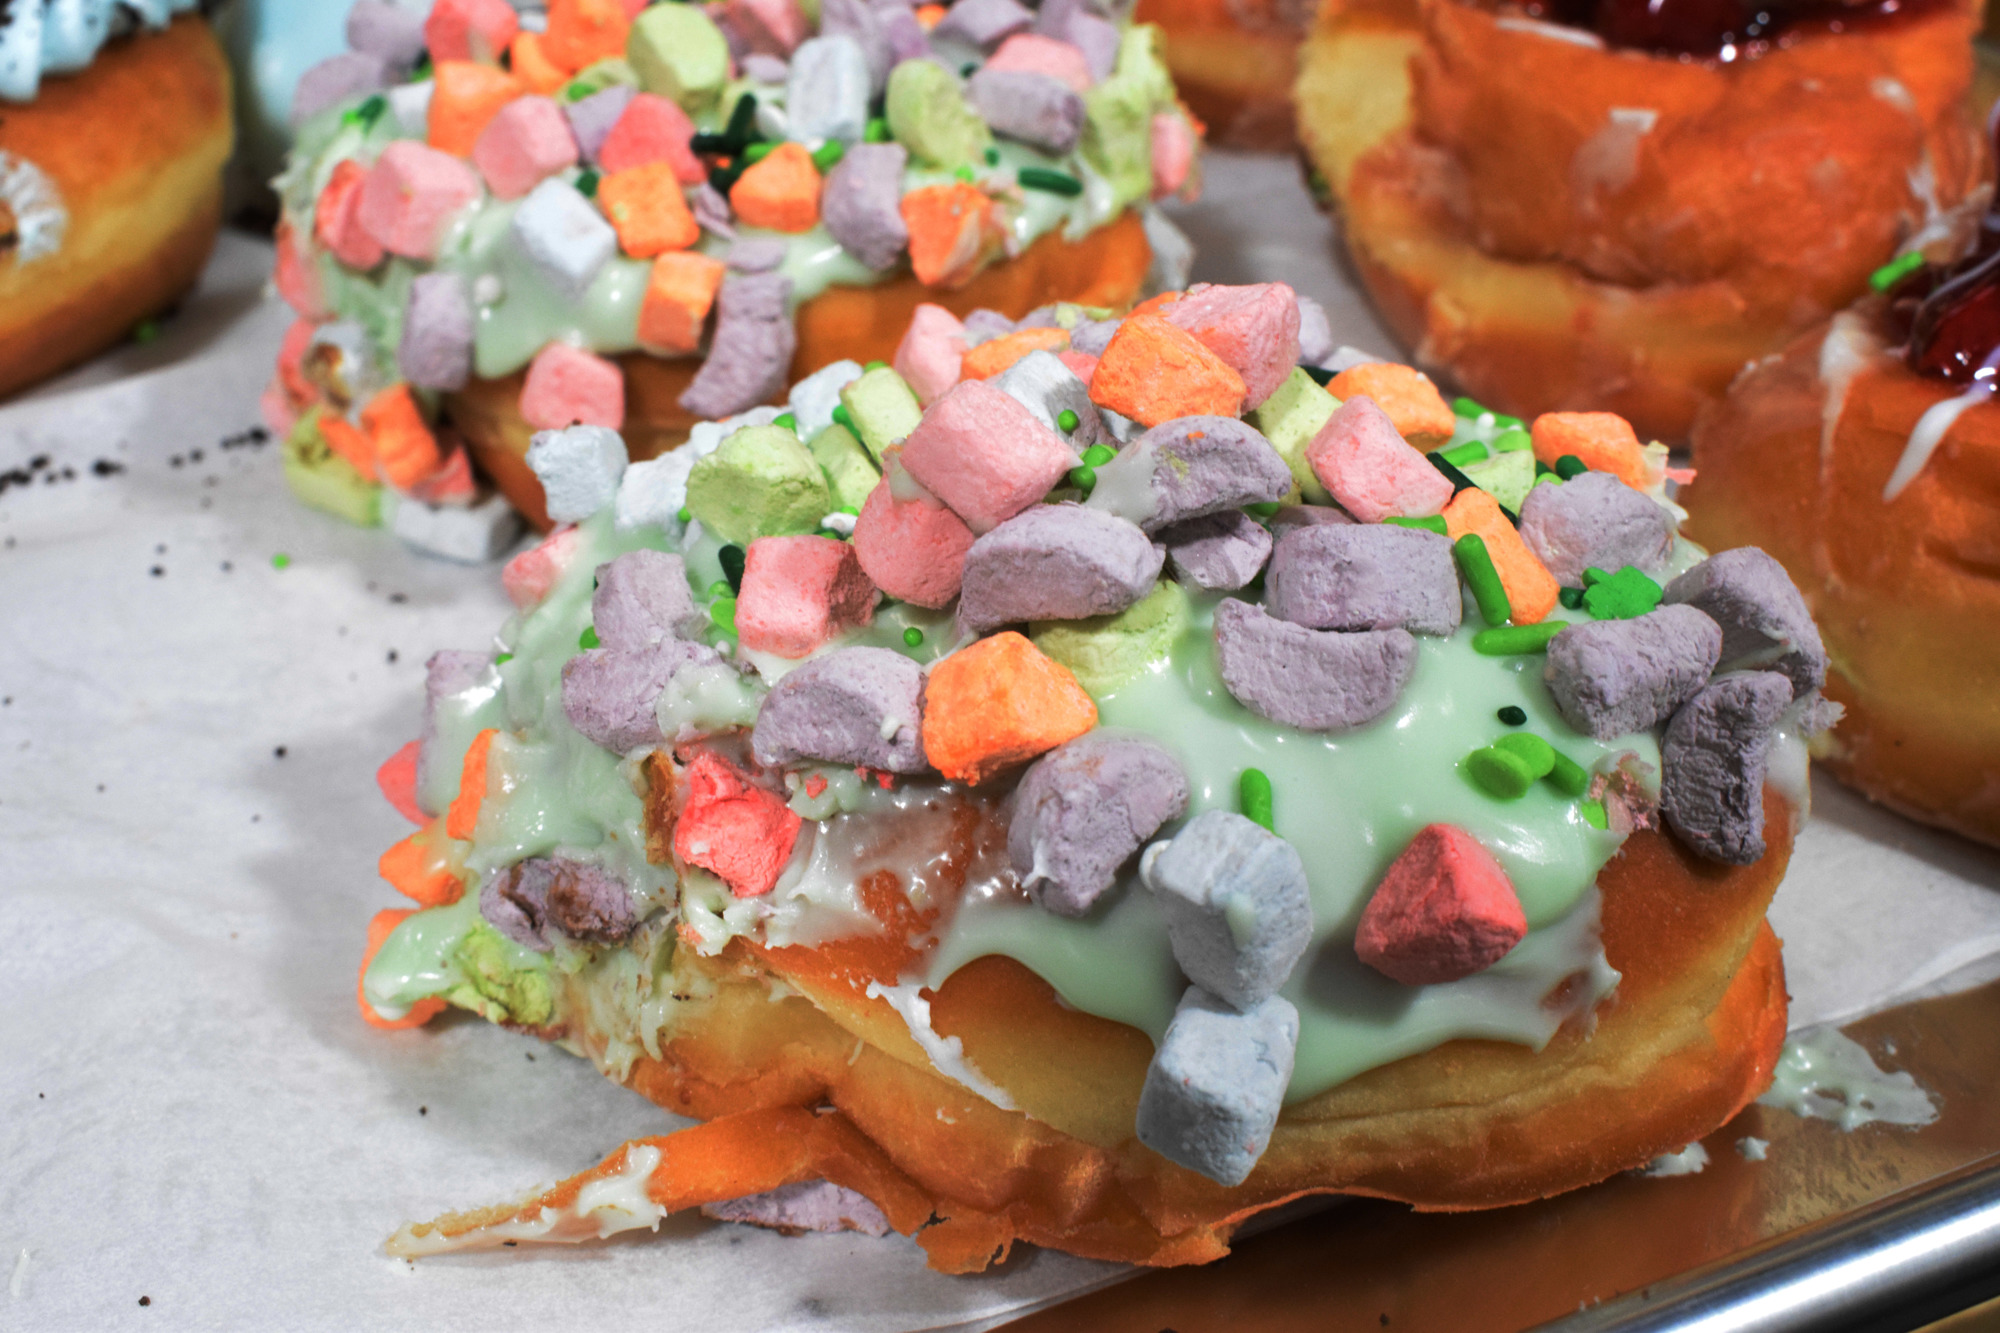 Five-O Donut Co. provides special donuts for holidays, such as the Lucky Charm donut for St. Patrick's Day.